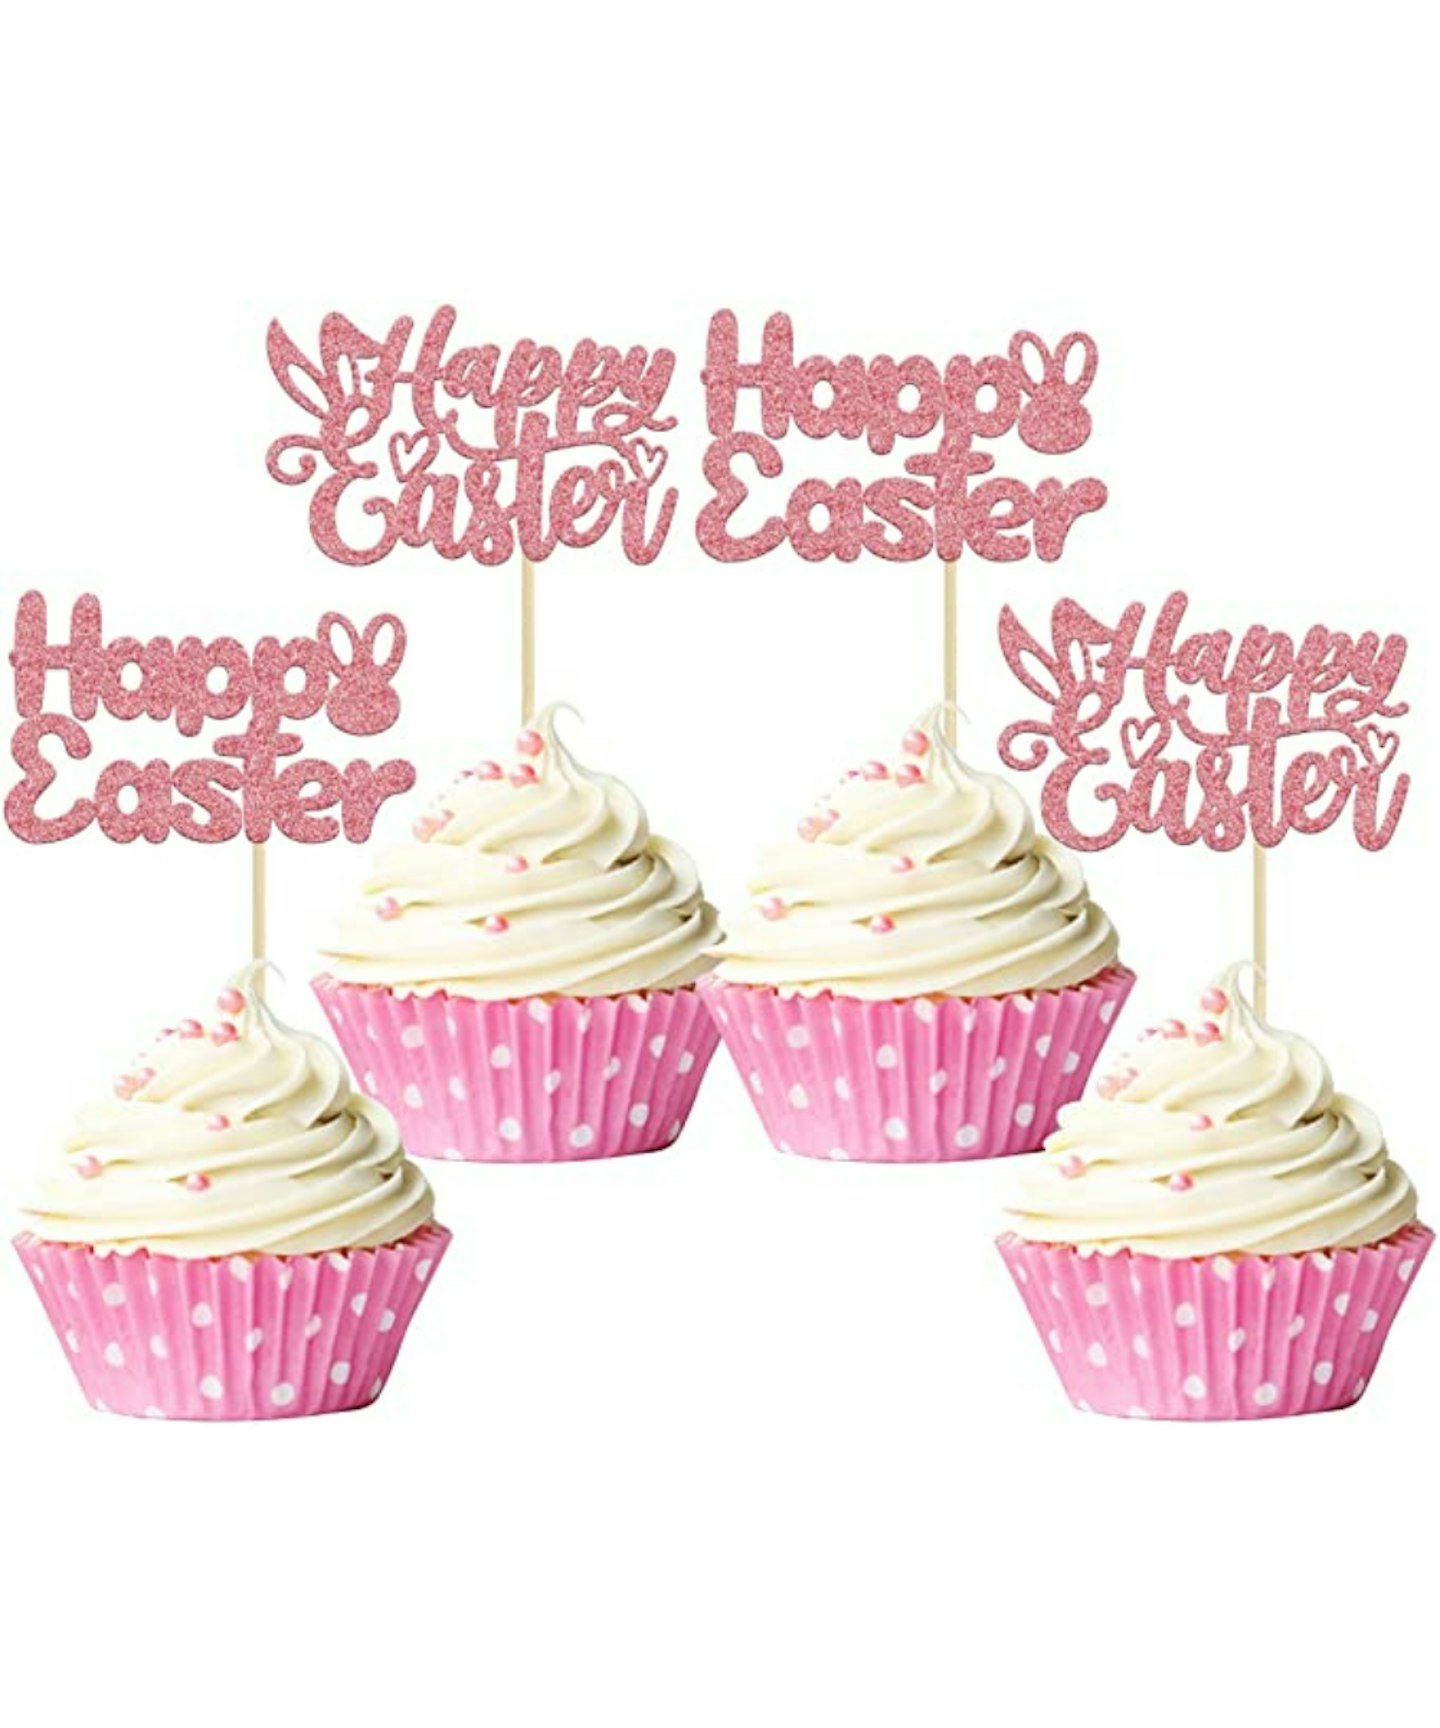 A picture of the Easter Bunny Cupcake Toppers